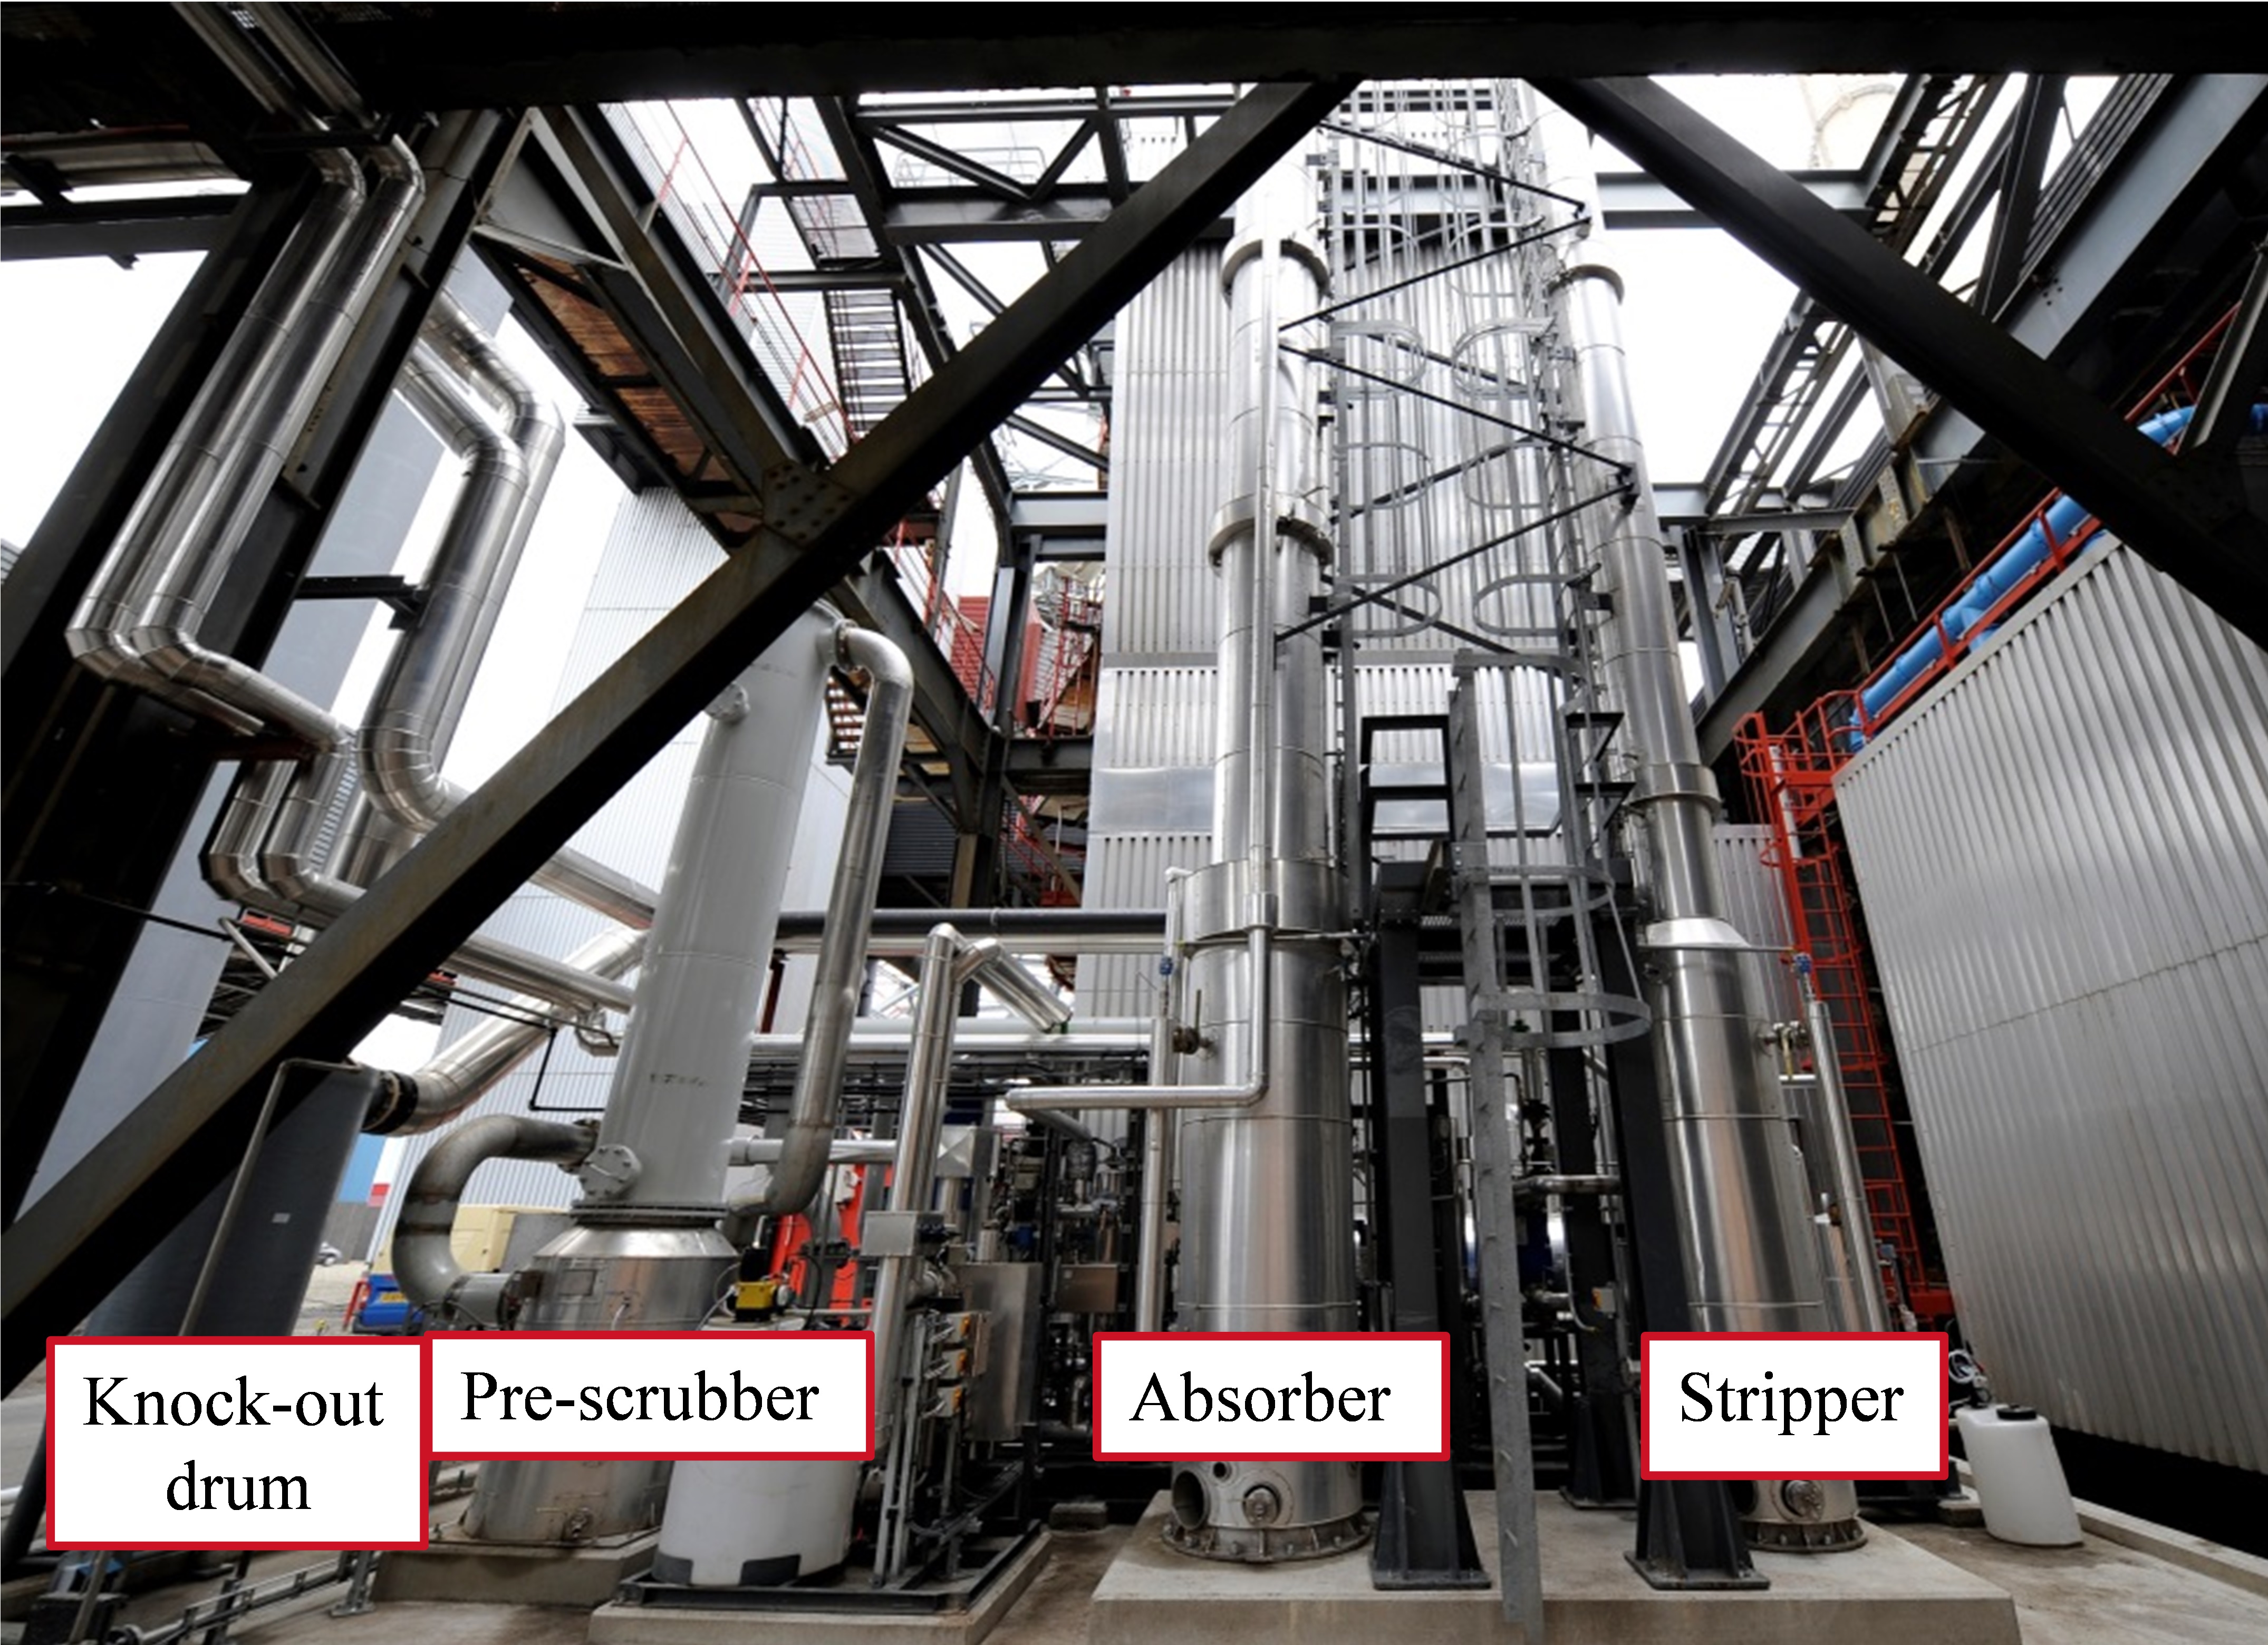 The Maasvlakte CO2 capture plant is shown with major components identified. Photo courtesy of Honeywell Process Solutions.